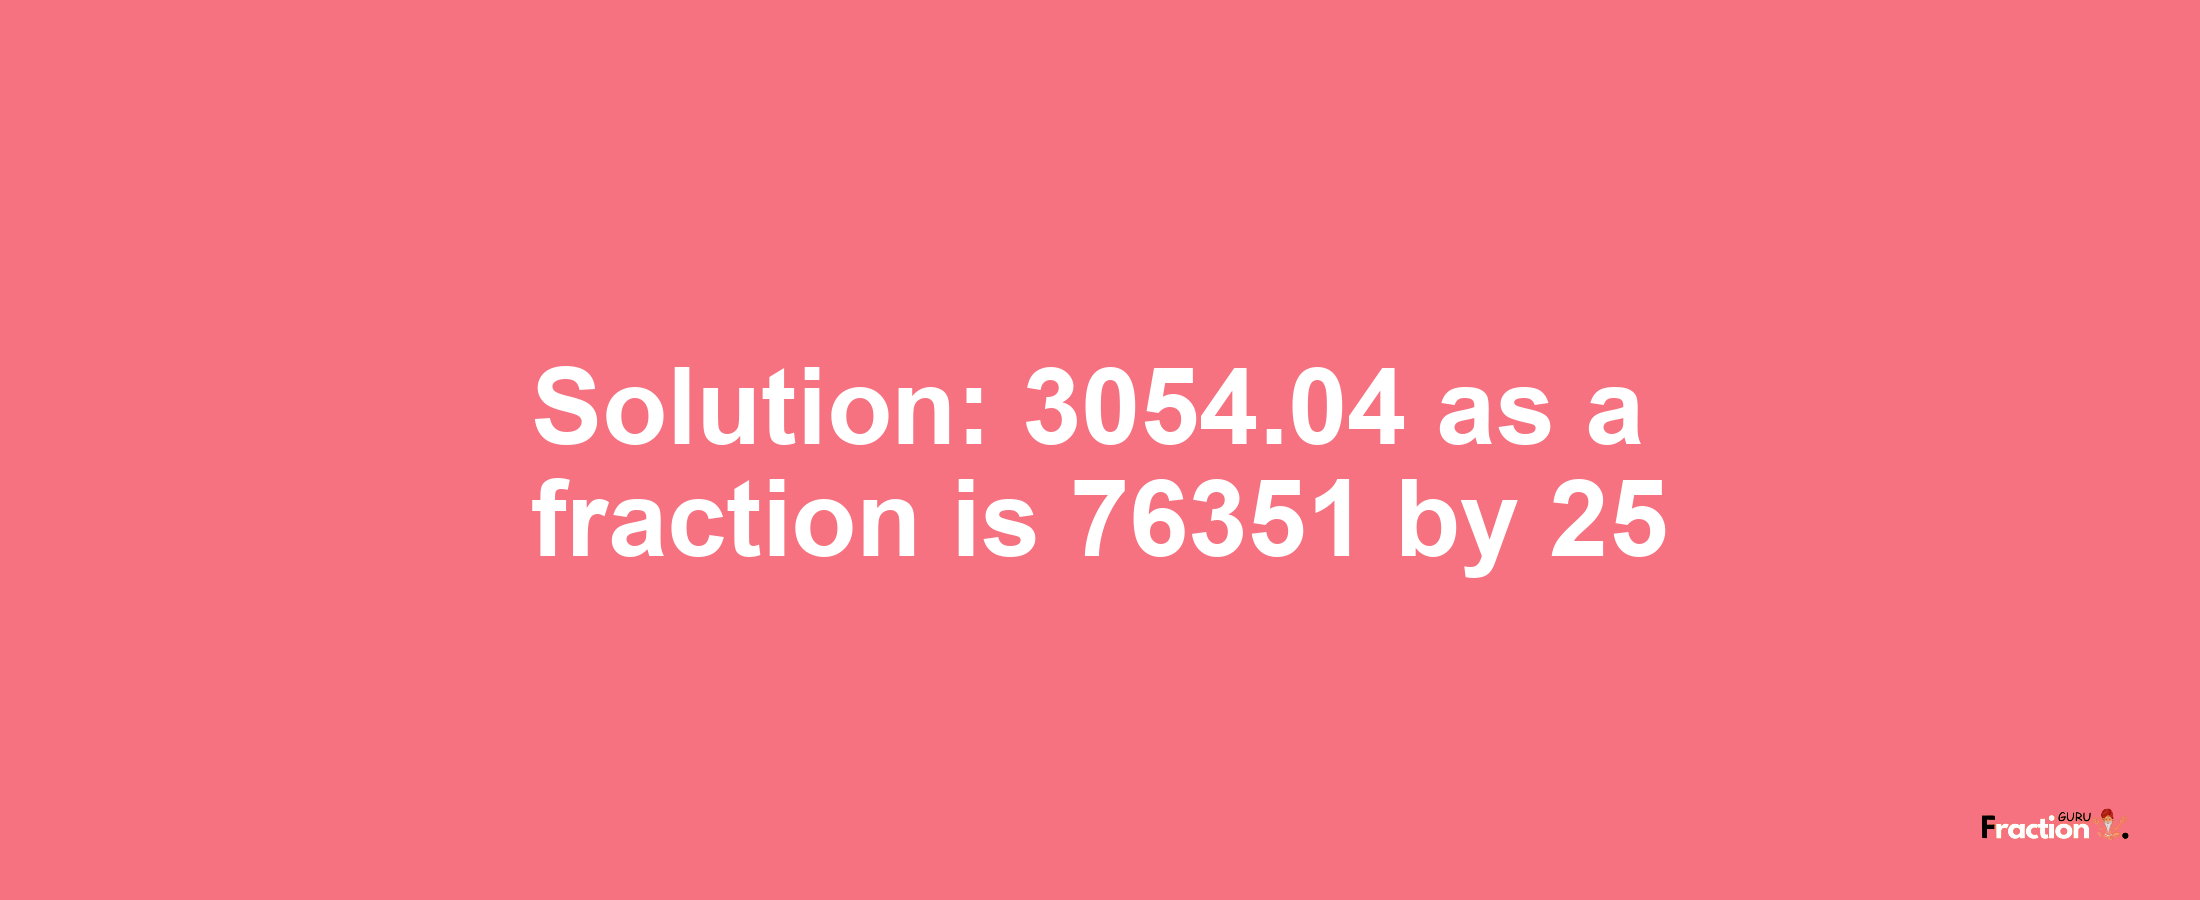 Solution:3054.04 as a fraction is 76351/25